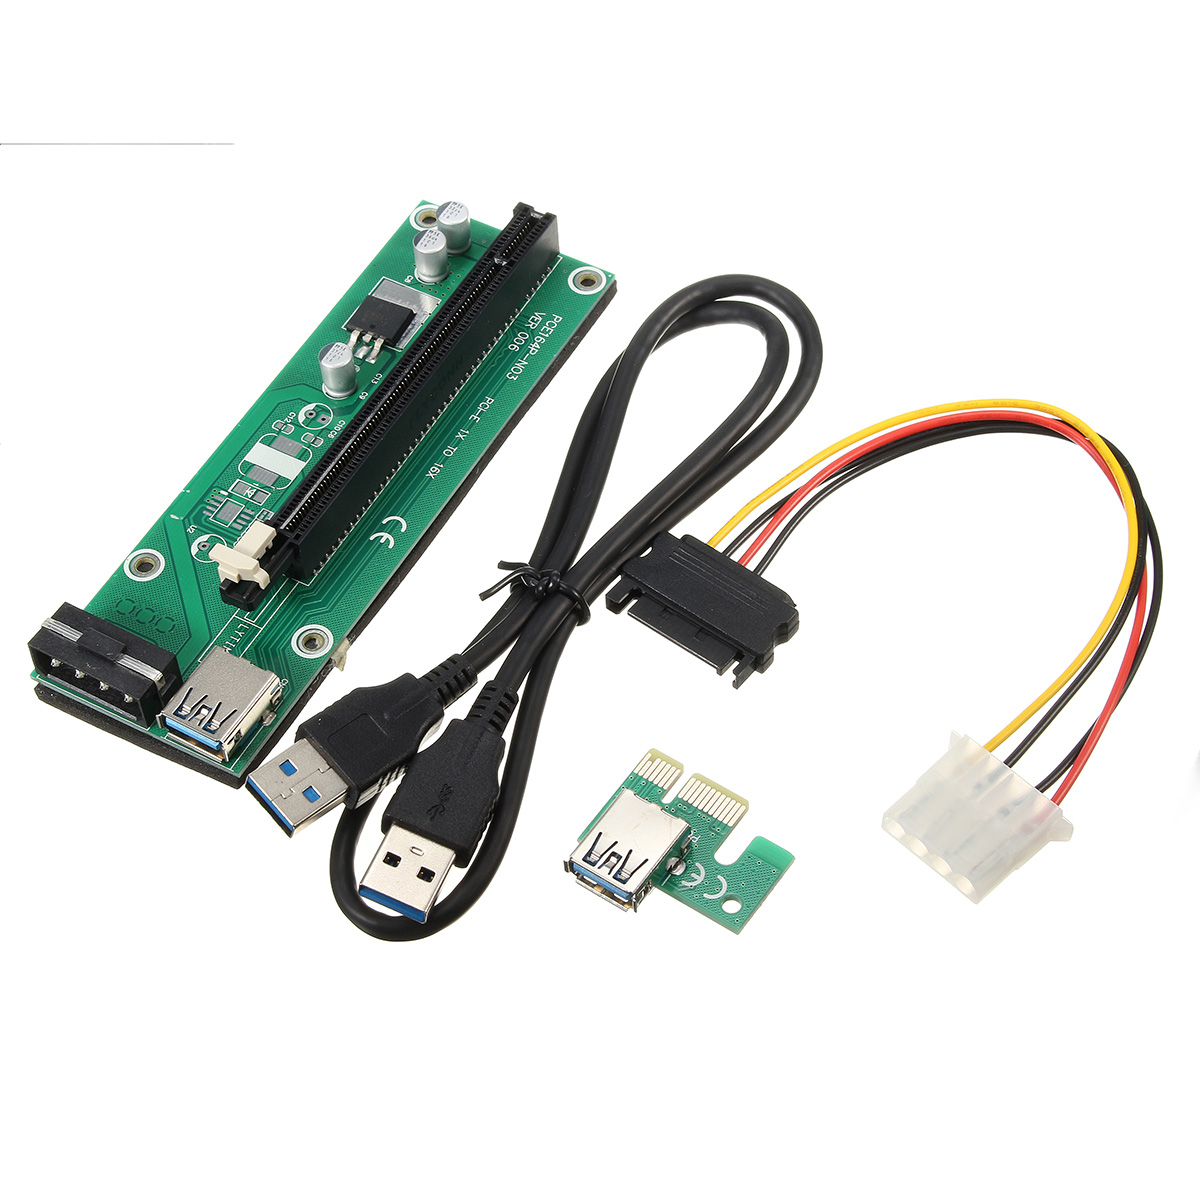 USB-30-PCI-E-Express-1x-to16x-Extension-Cable-Extender-Riser-Board-Card-Adapter-SATA-Cable-1250502-1